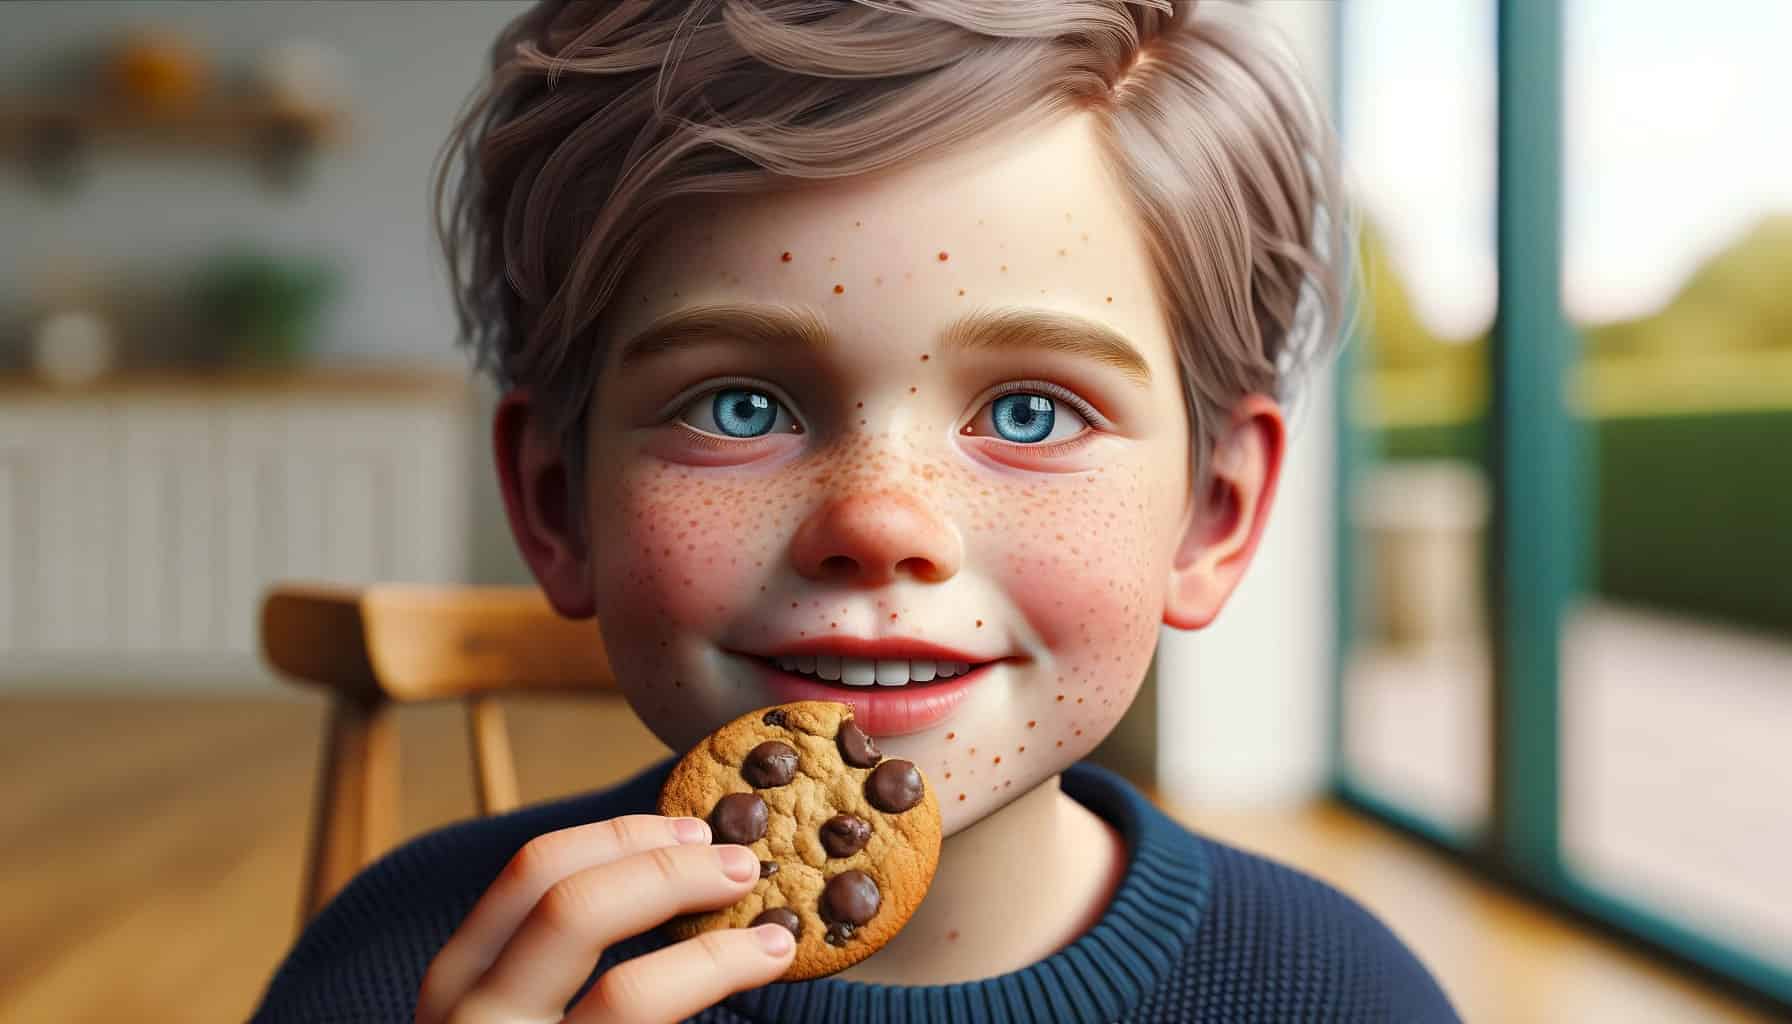 Child eating chocolate cookies